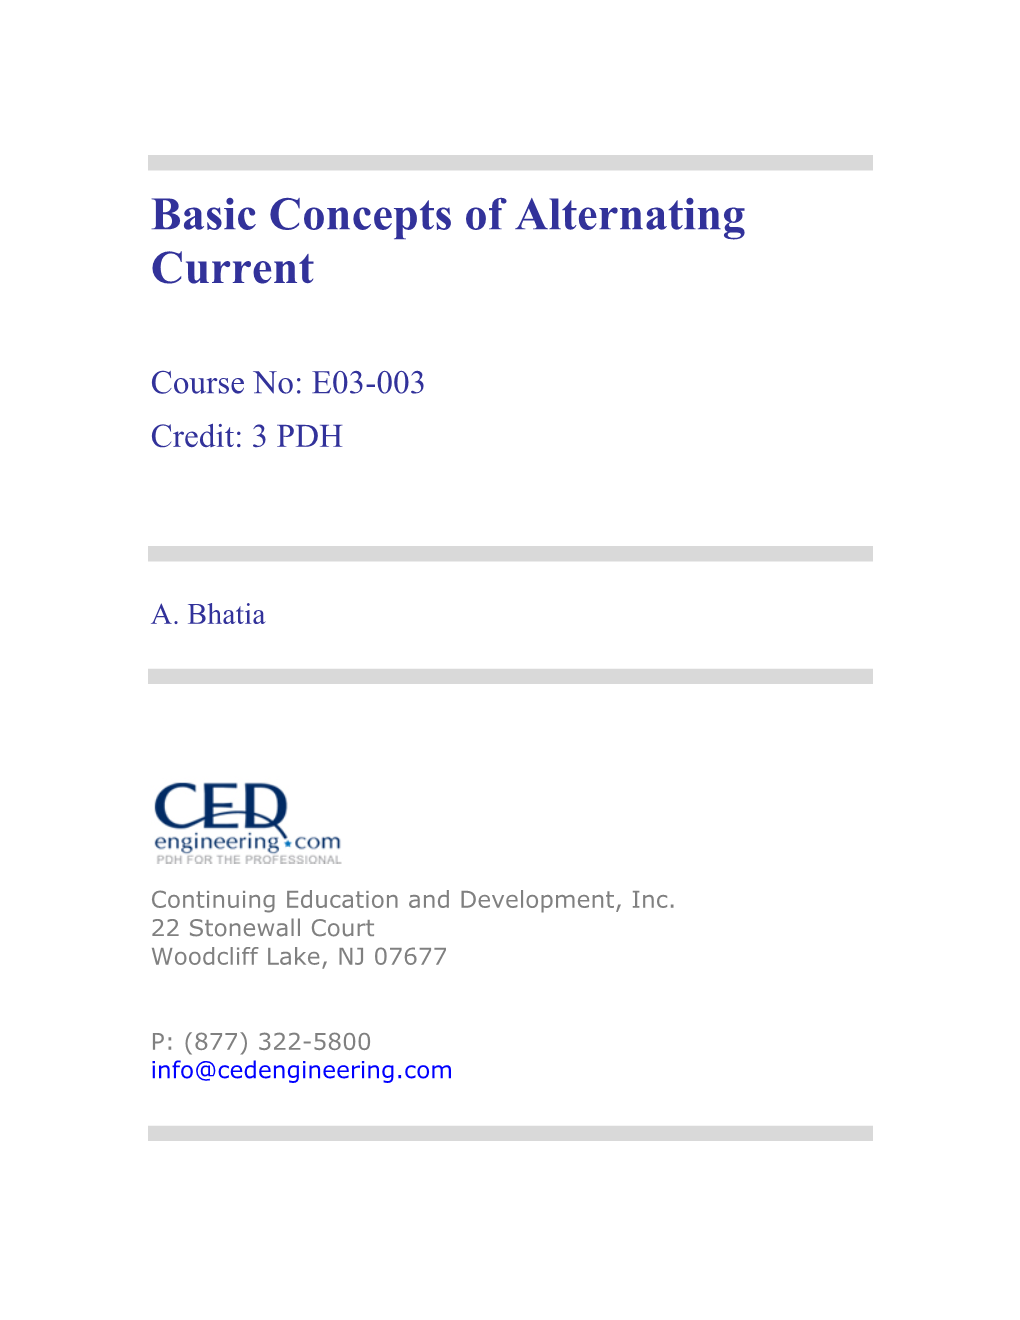 Basic Concepts of Alternating Current